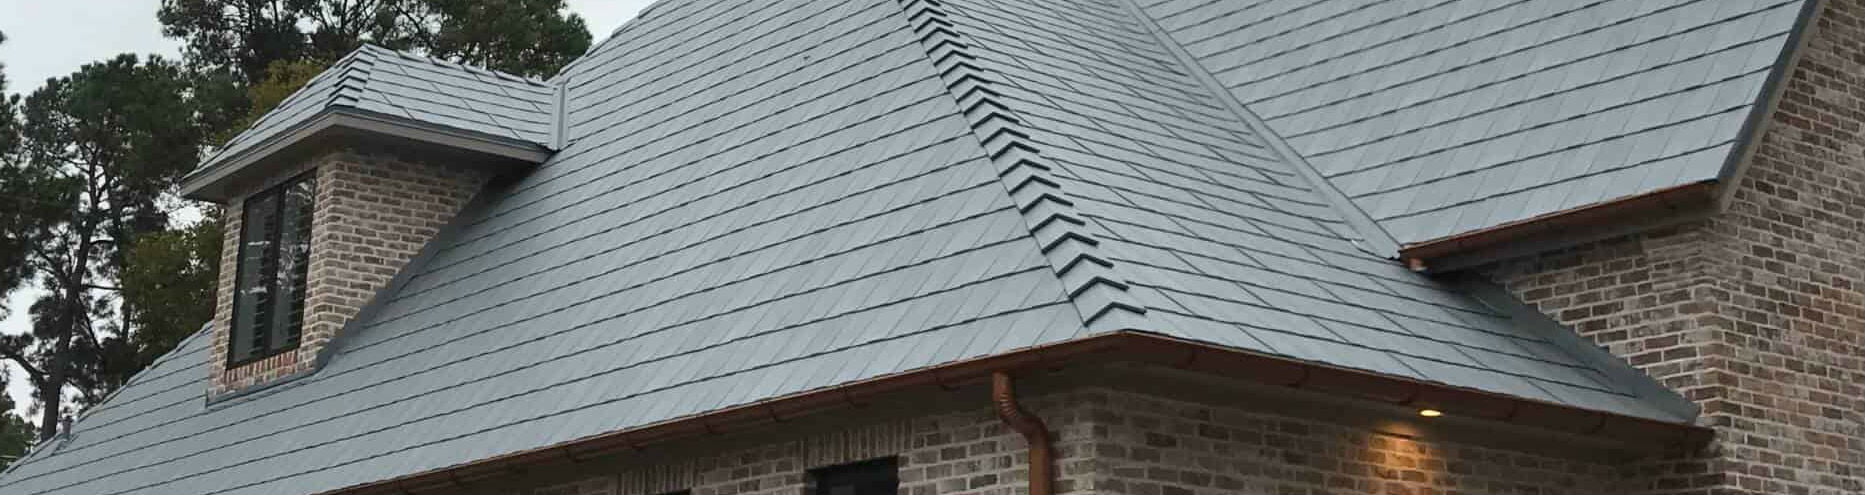 Pearland TX Metal Roof Installers Near Me